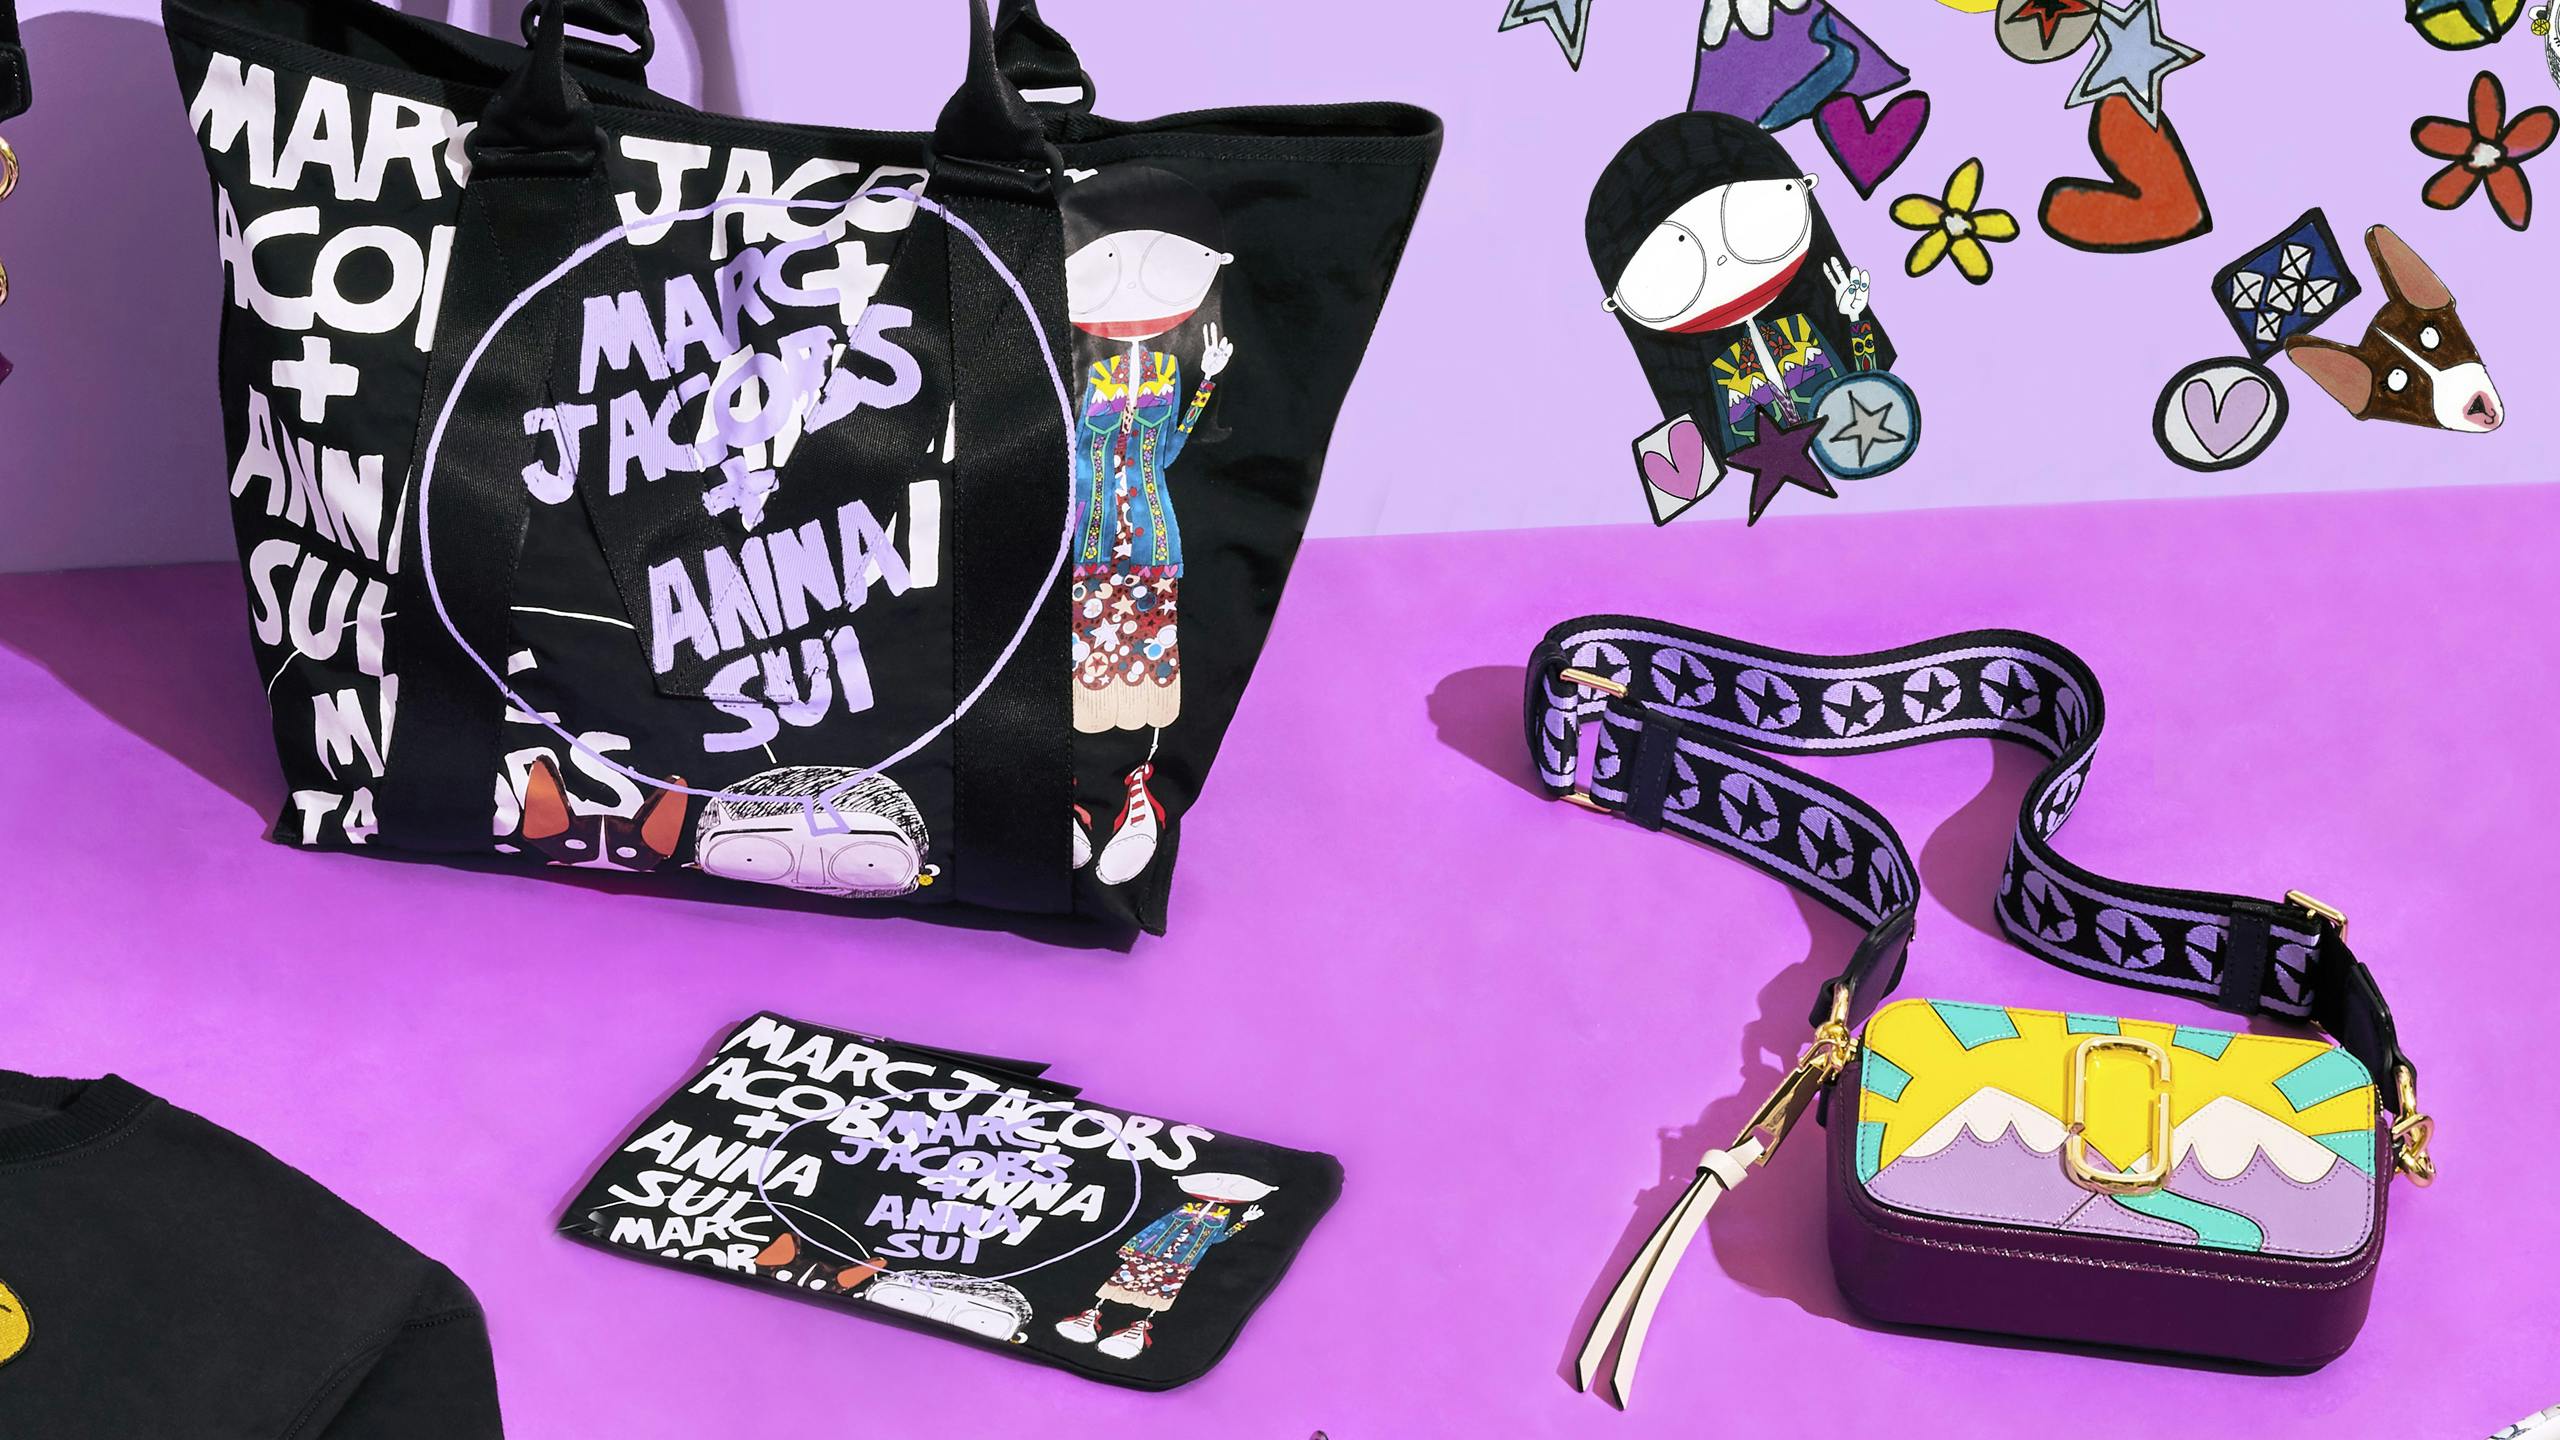 Marc Jacobs, Anna Sui Collaborate on Limited-Edition Collection – WWD